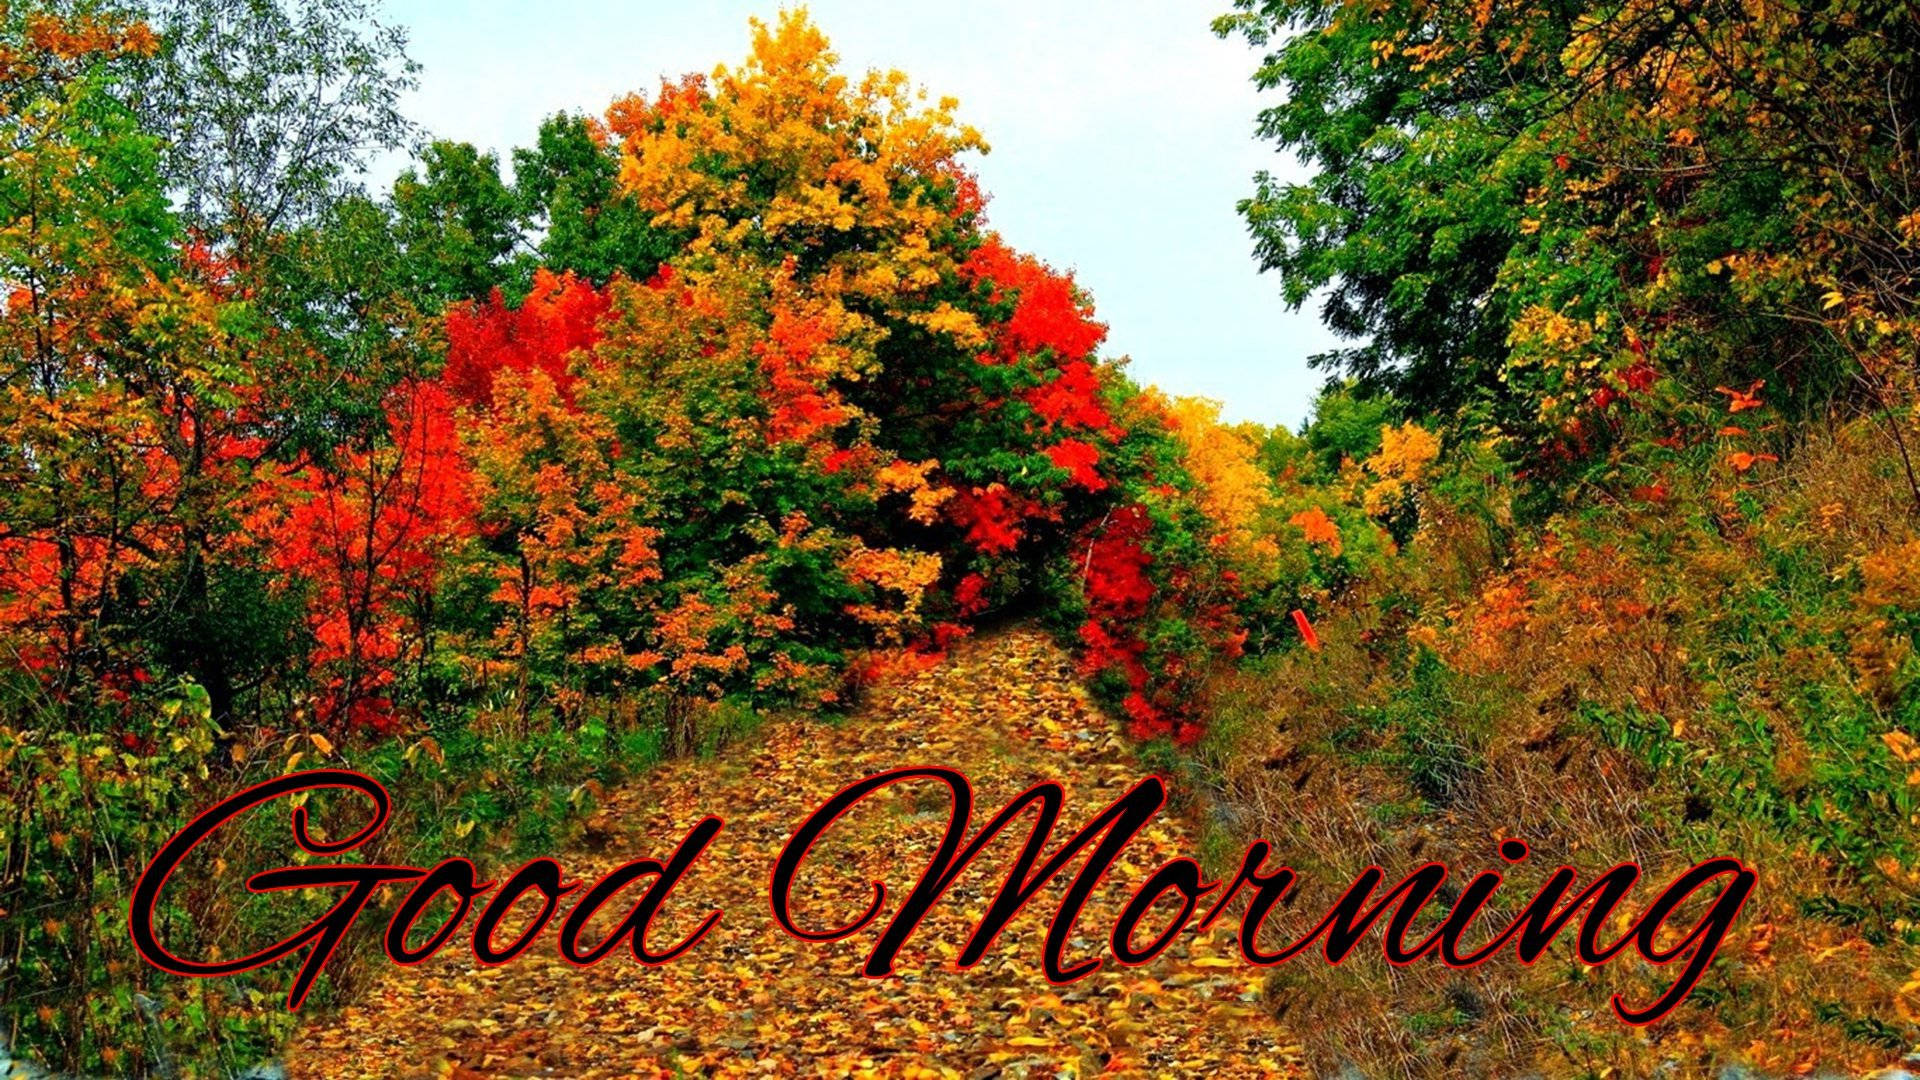 Good Morning 1920X1080 Wallpaper and Background Image